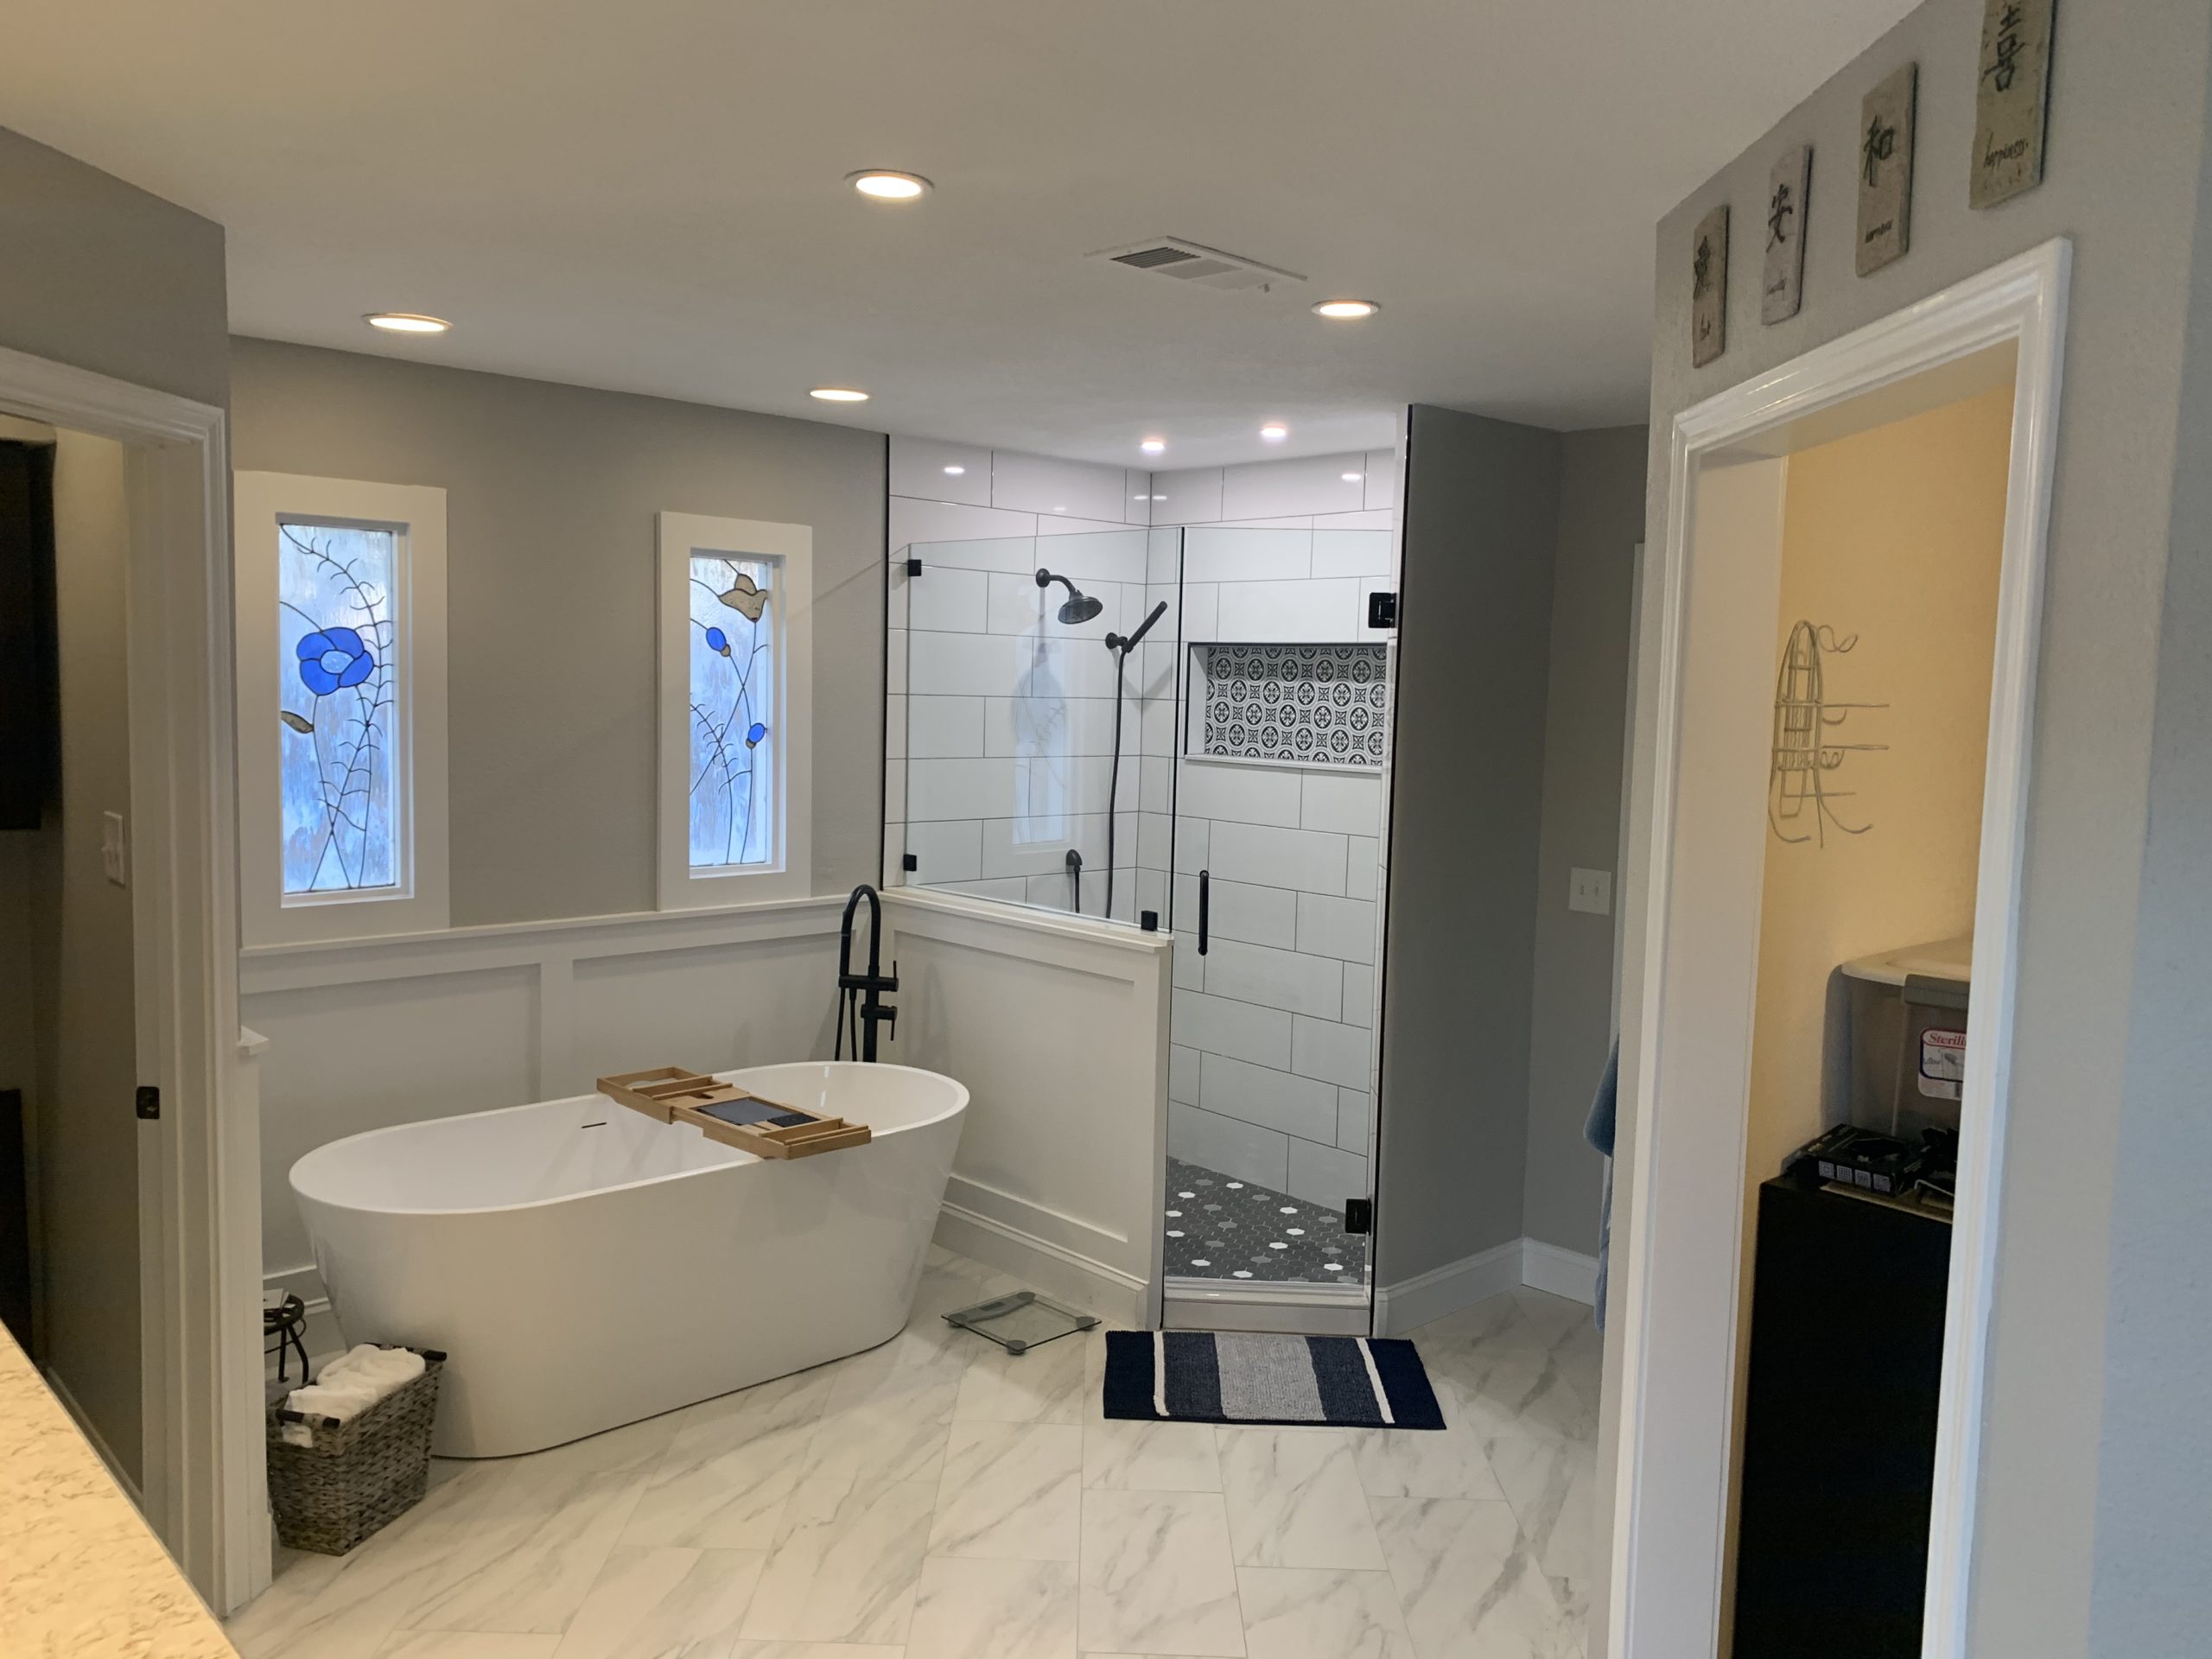 Updated bathroom remodel project photo.